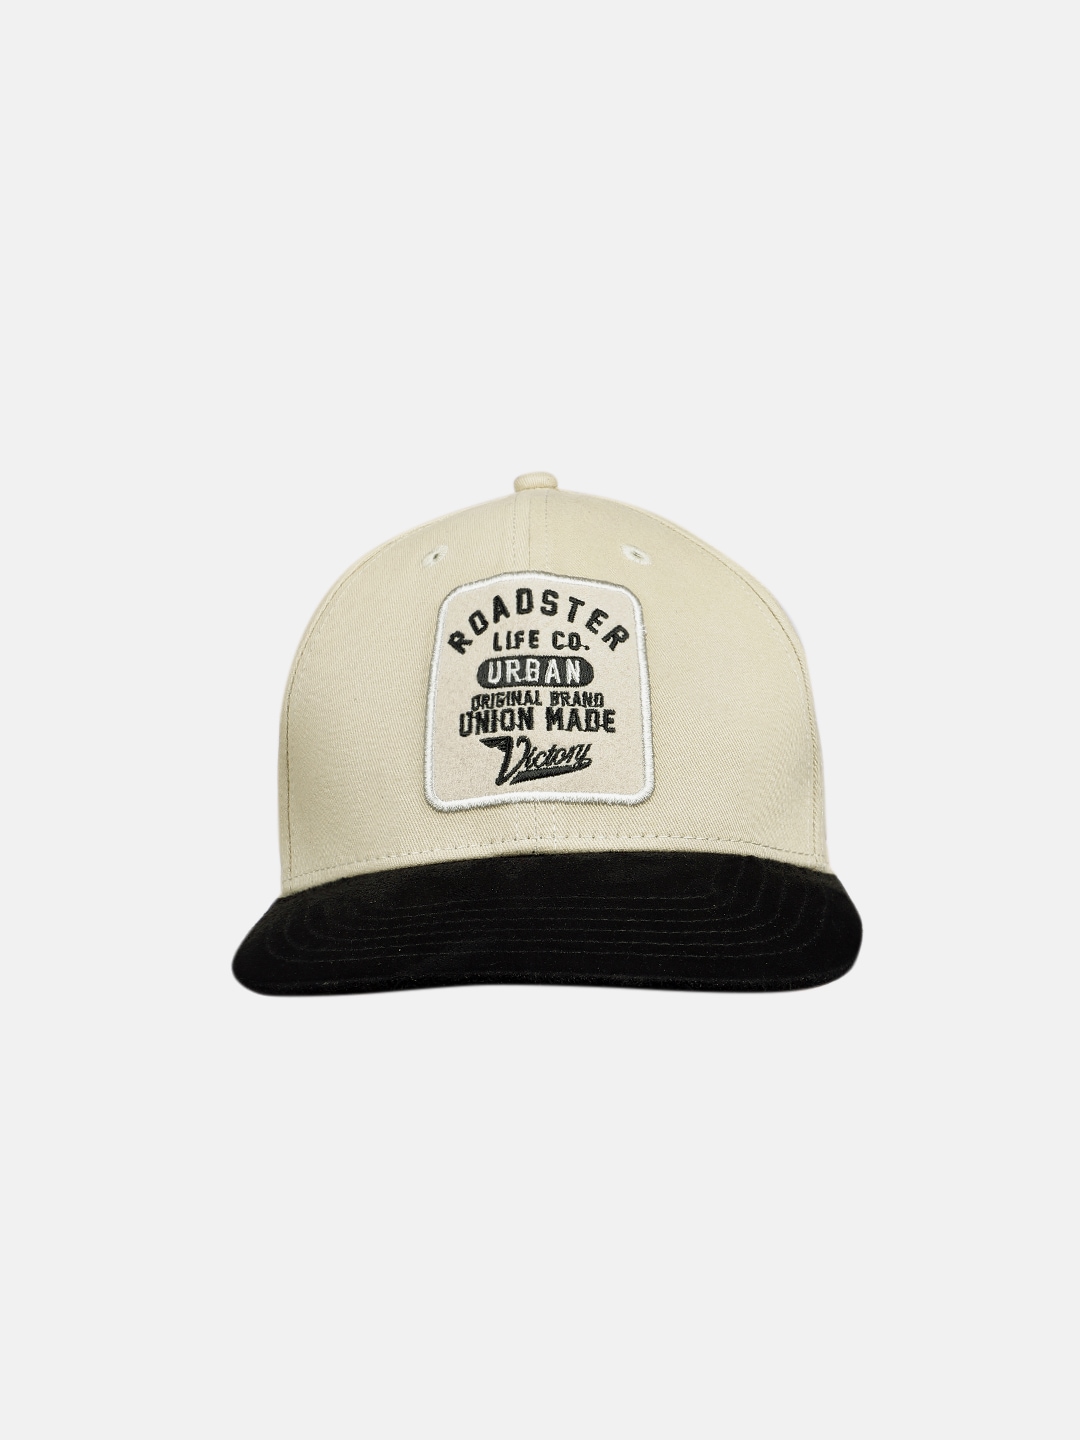 Roadster Unisex Beige & Black Embroidered Snapback Cap Price in India